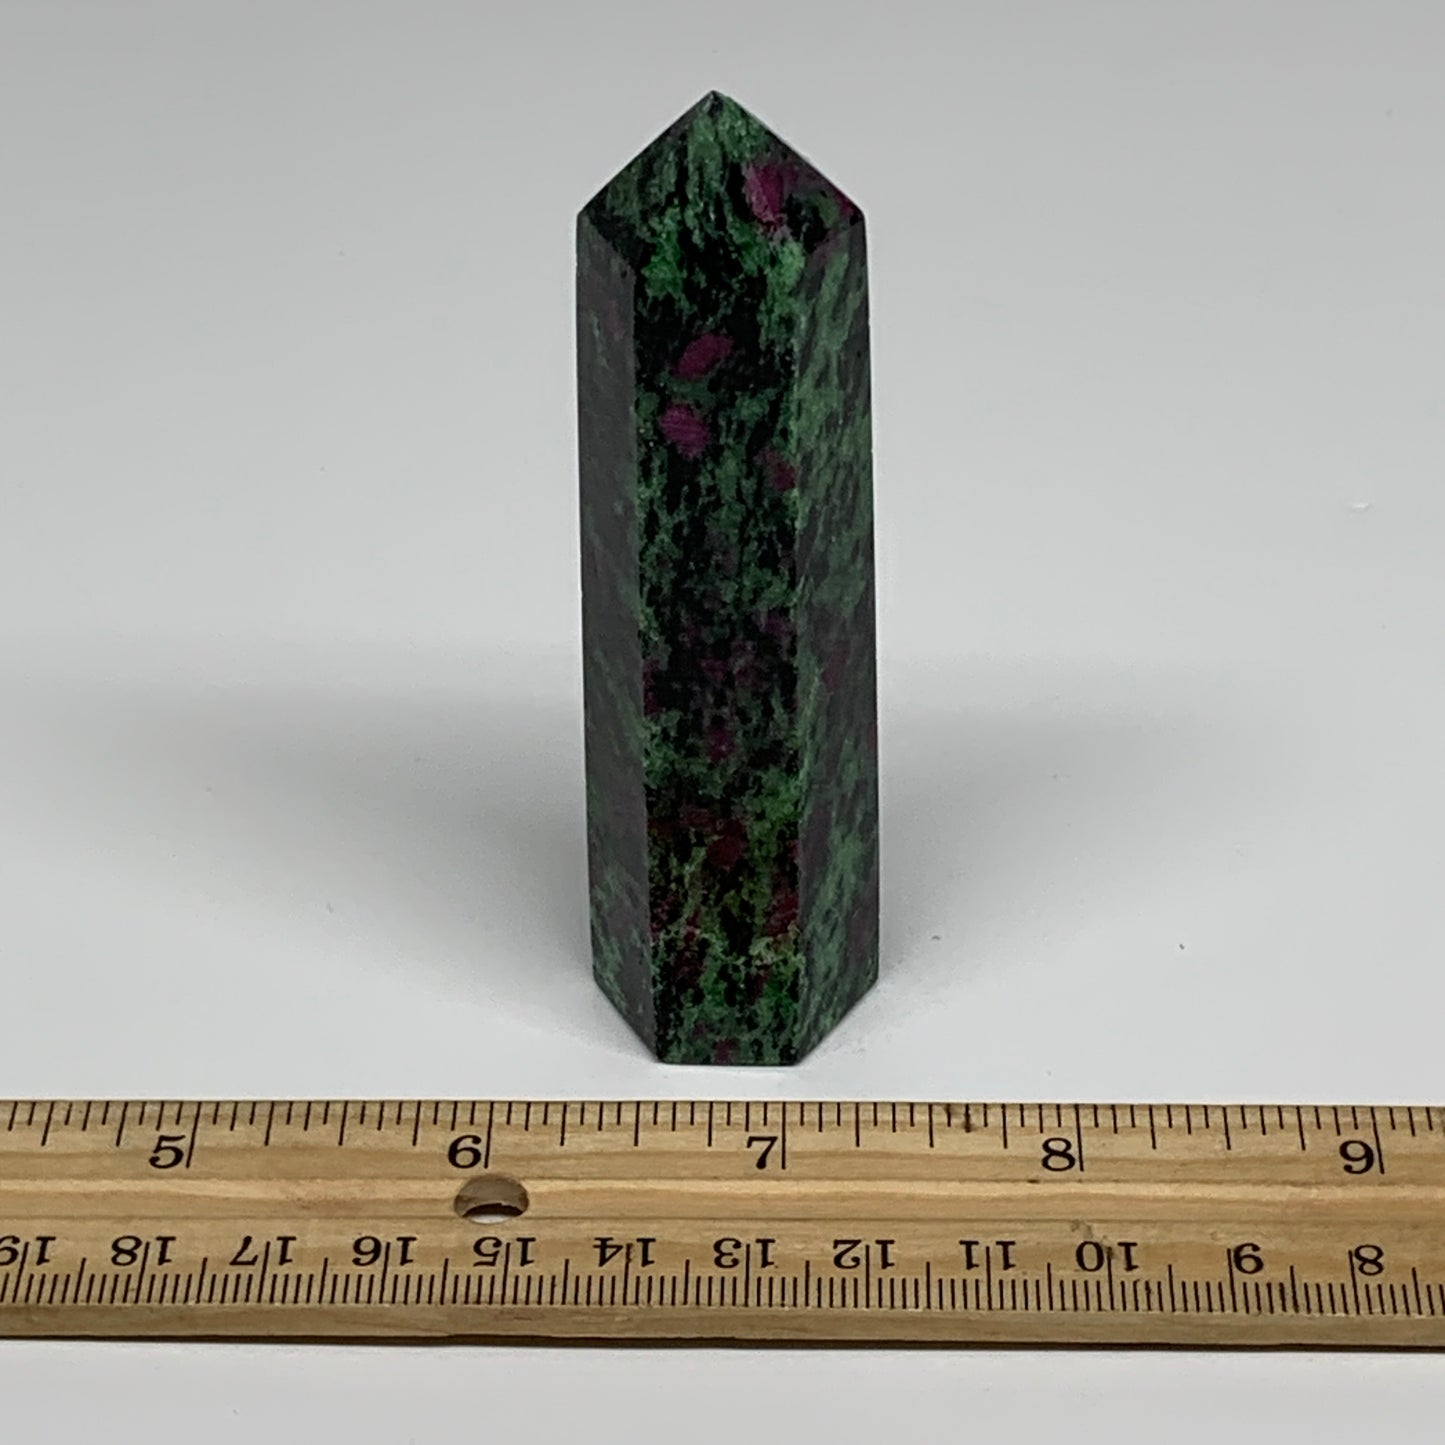 113.5g, 3.5"x0.9", Natural Ruby Zoisite Tower Point Obelisk @India, B31416